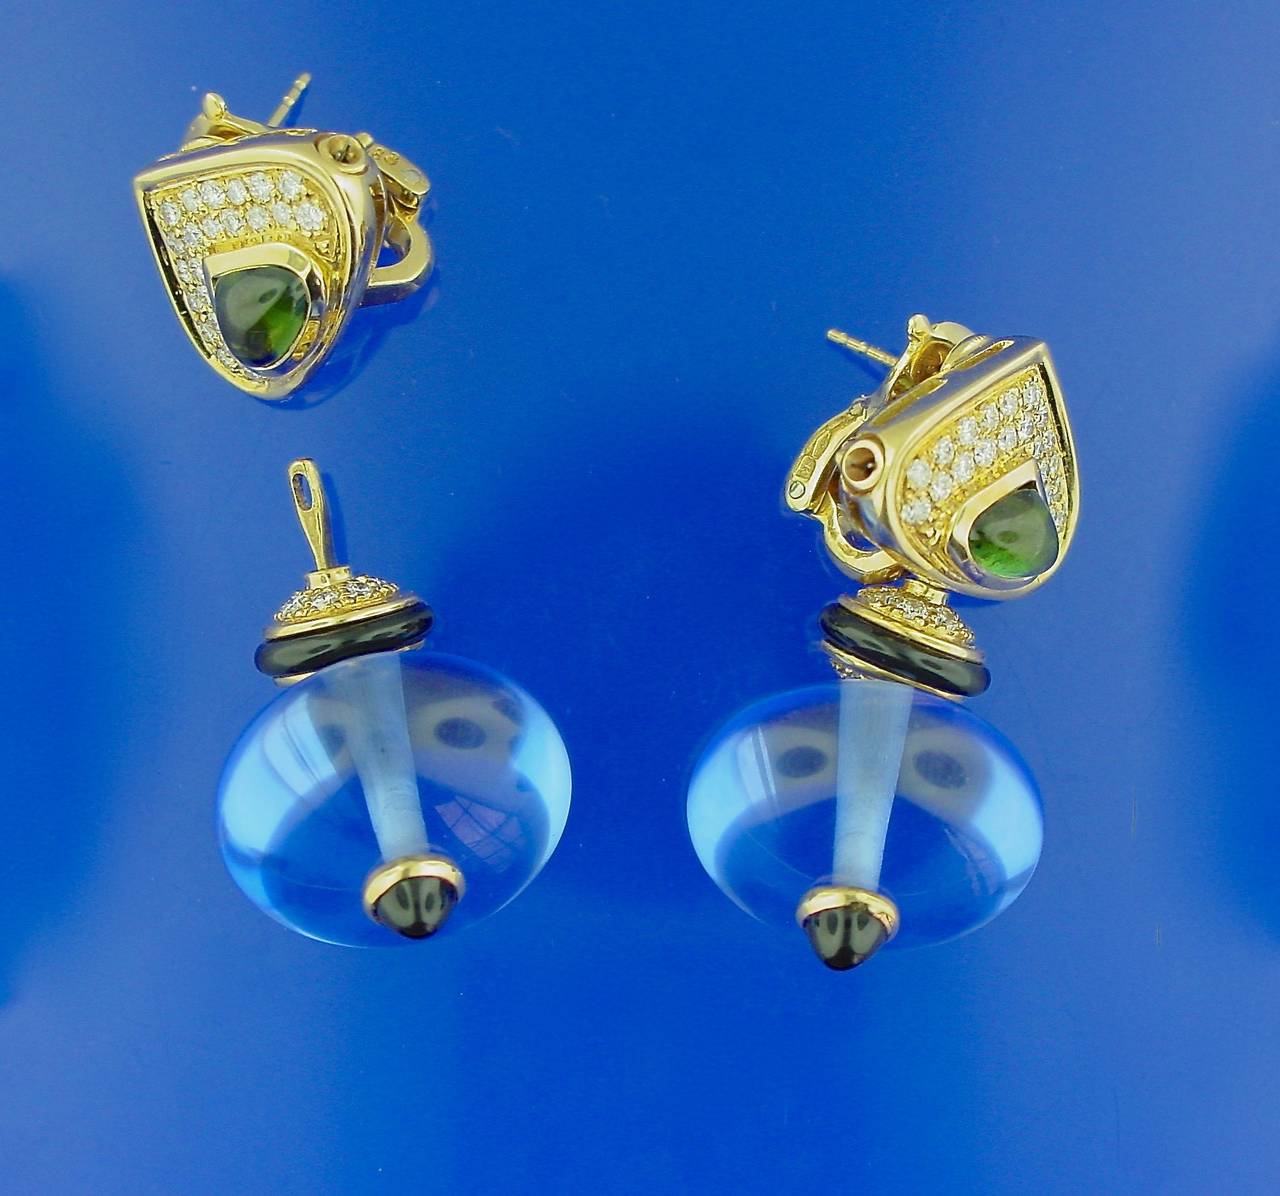 A Pair of Marina B 'Pneu' 18 Karat Yellow Gold Blue Bead Drop Earrings set with Diamonds, Onyx and Green Tourmalines. With detachable tops, which may be worn separately and interchangeable bottoms. Set with approximately 1.15 carats of round cut